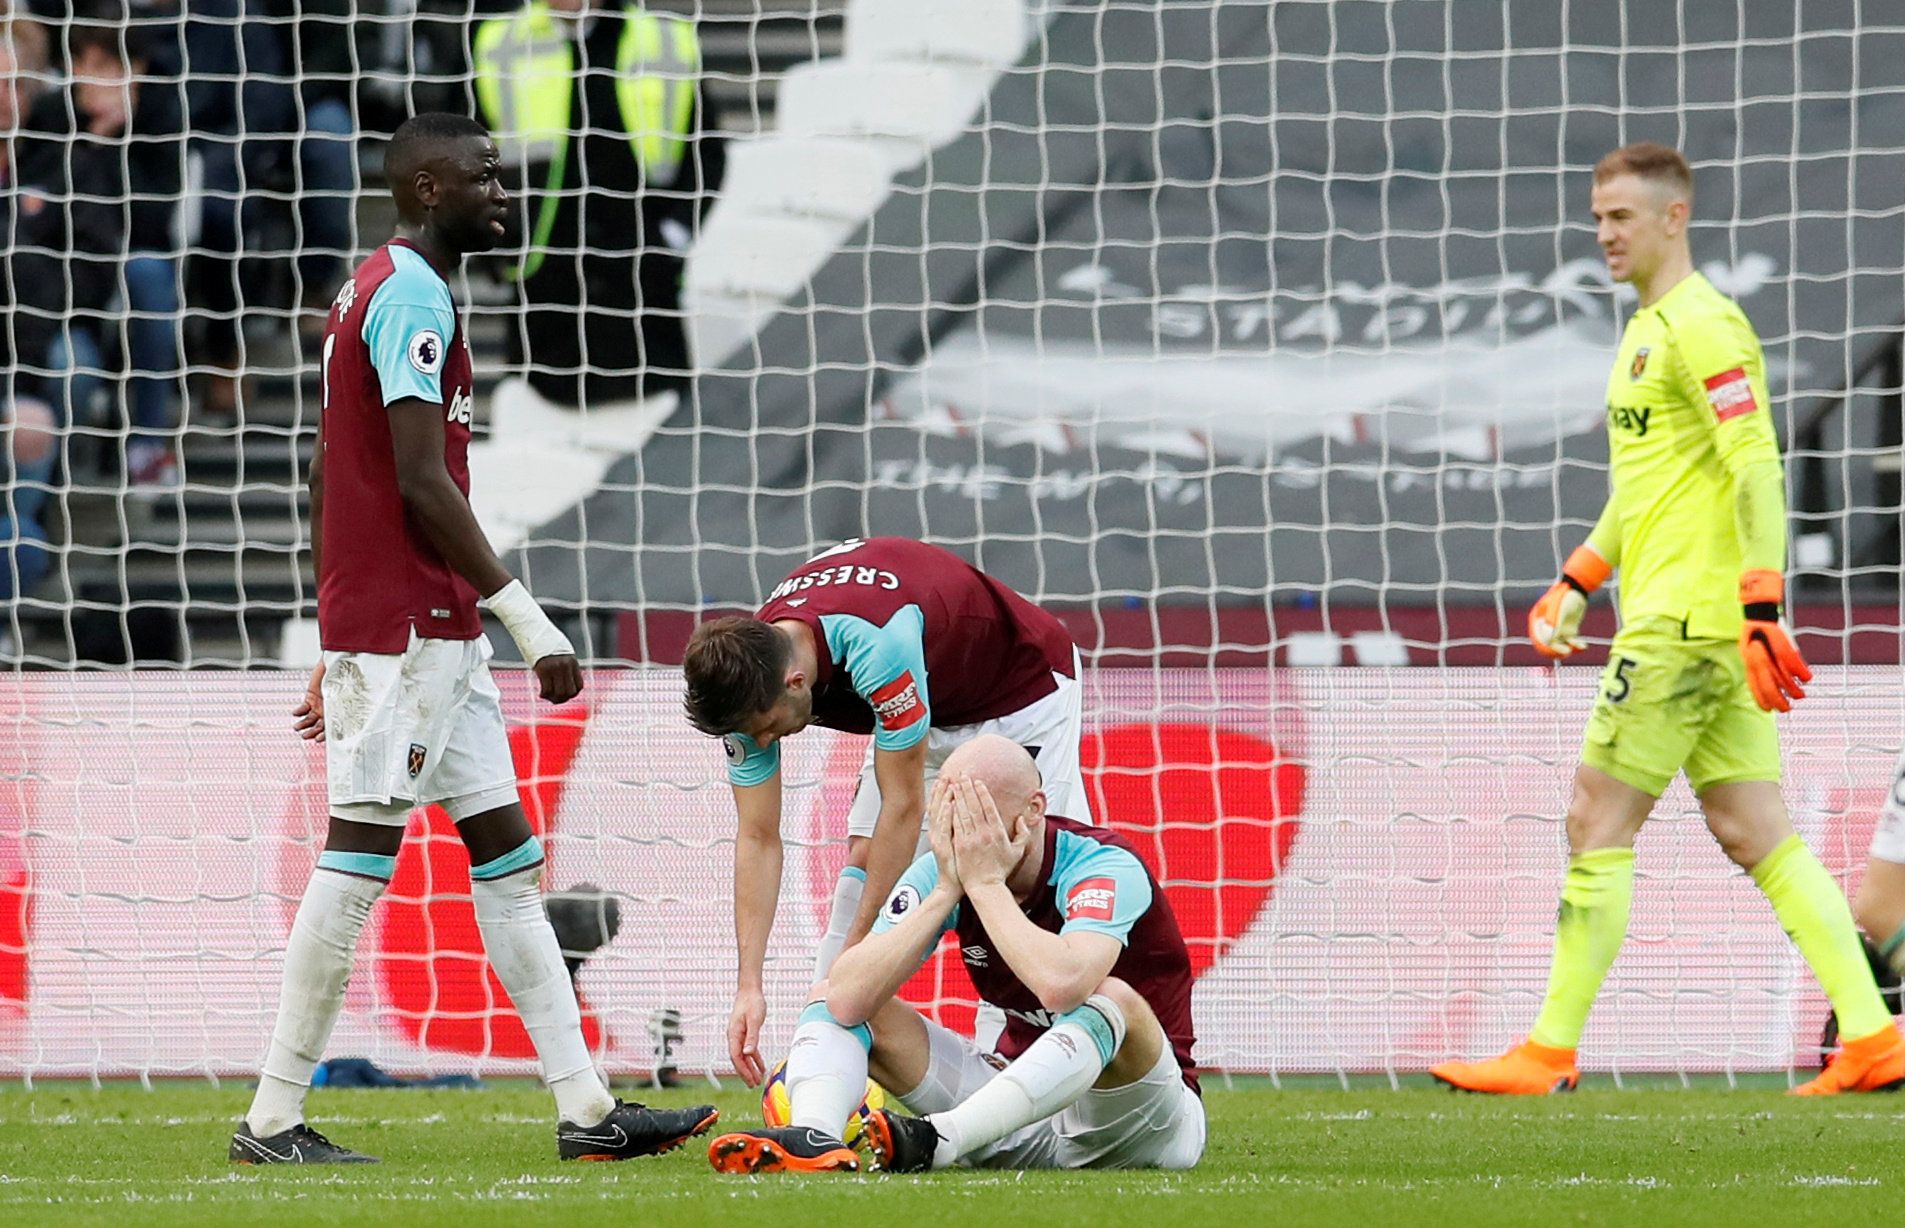 Soccer Football - Premier League - West Ham United vs Burnley - London Stadium, London, Britain - March 10, 2018   West Ham United's James Collins and Cheikhou Kouyate look dejected after a Burnley goal   REUTERS/David Klein    EDITORIAL USE ONLY. No use with unauthorized audio, video, data, fixture lists, club/league logos or "live" services. Online in-match use limited to 75 images, no video emulation. No use in betting, games or single club/league/player publications.  Please contact your acc